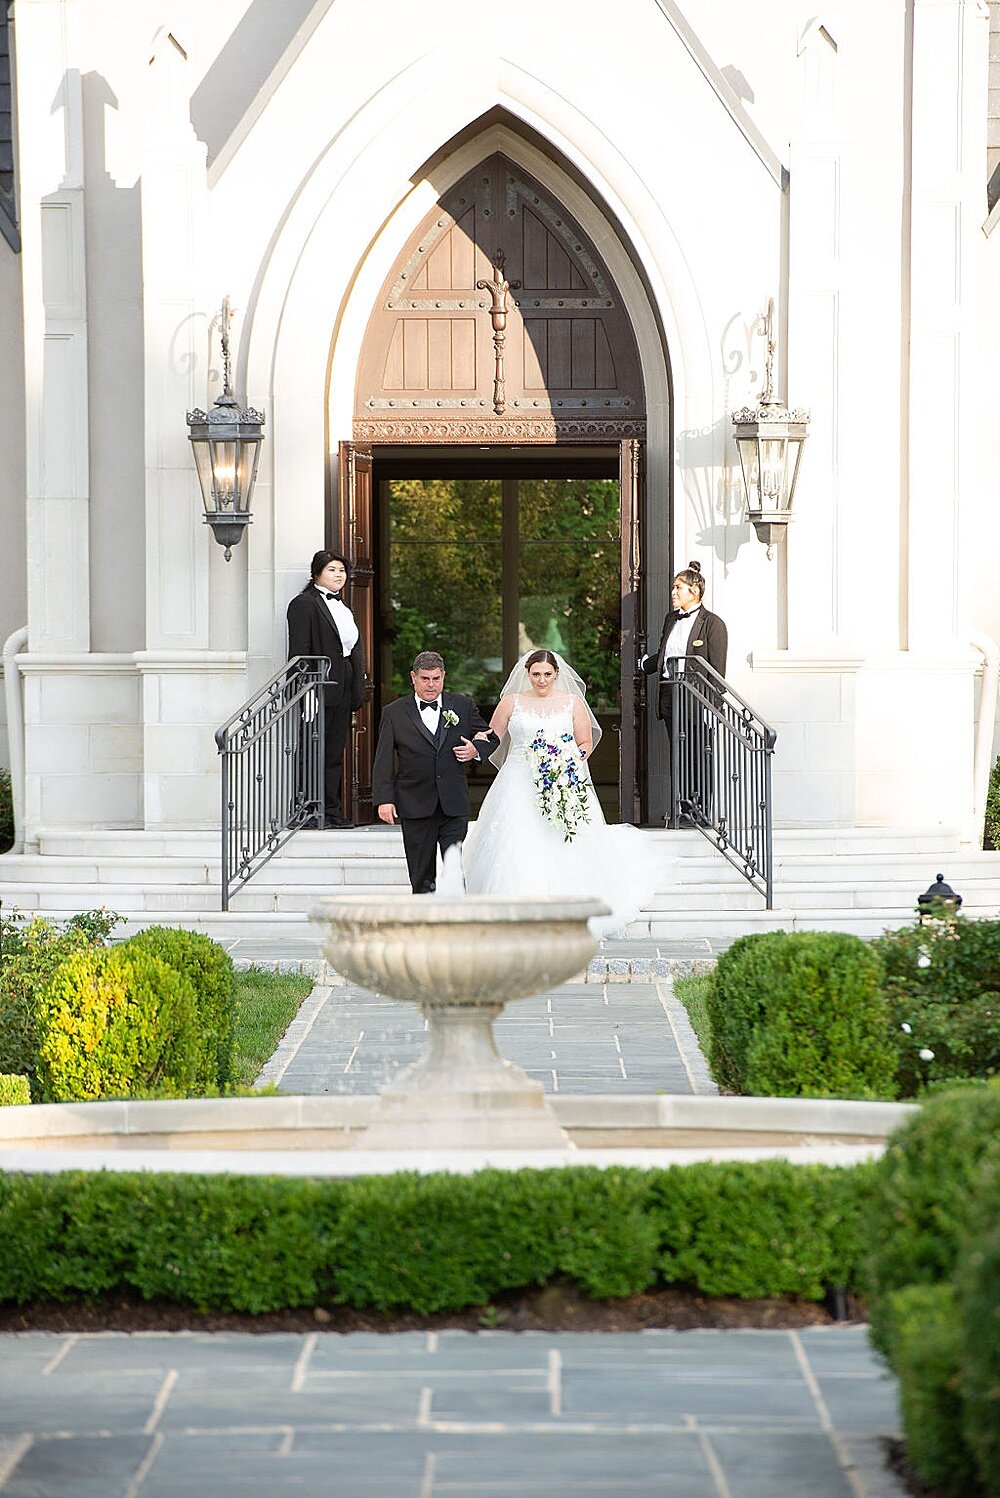 45_Park Chateau Estate and Gardens Wedding_East Brunswick New Jersey_JD Photography.jpg